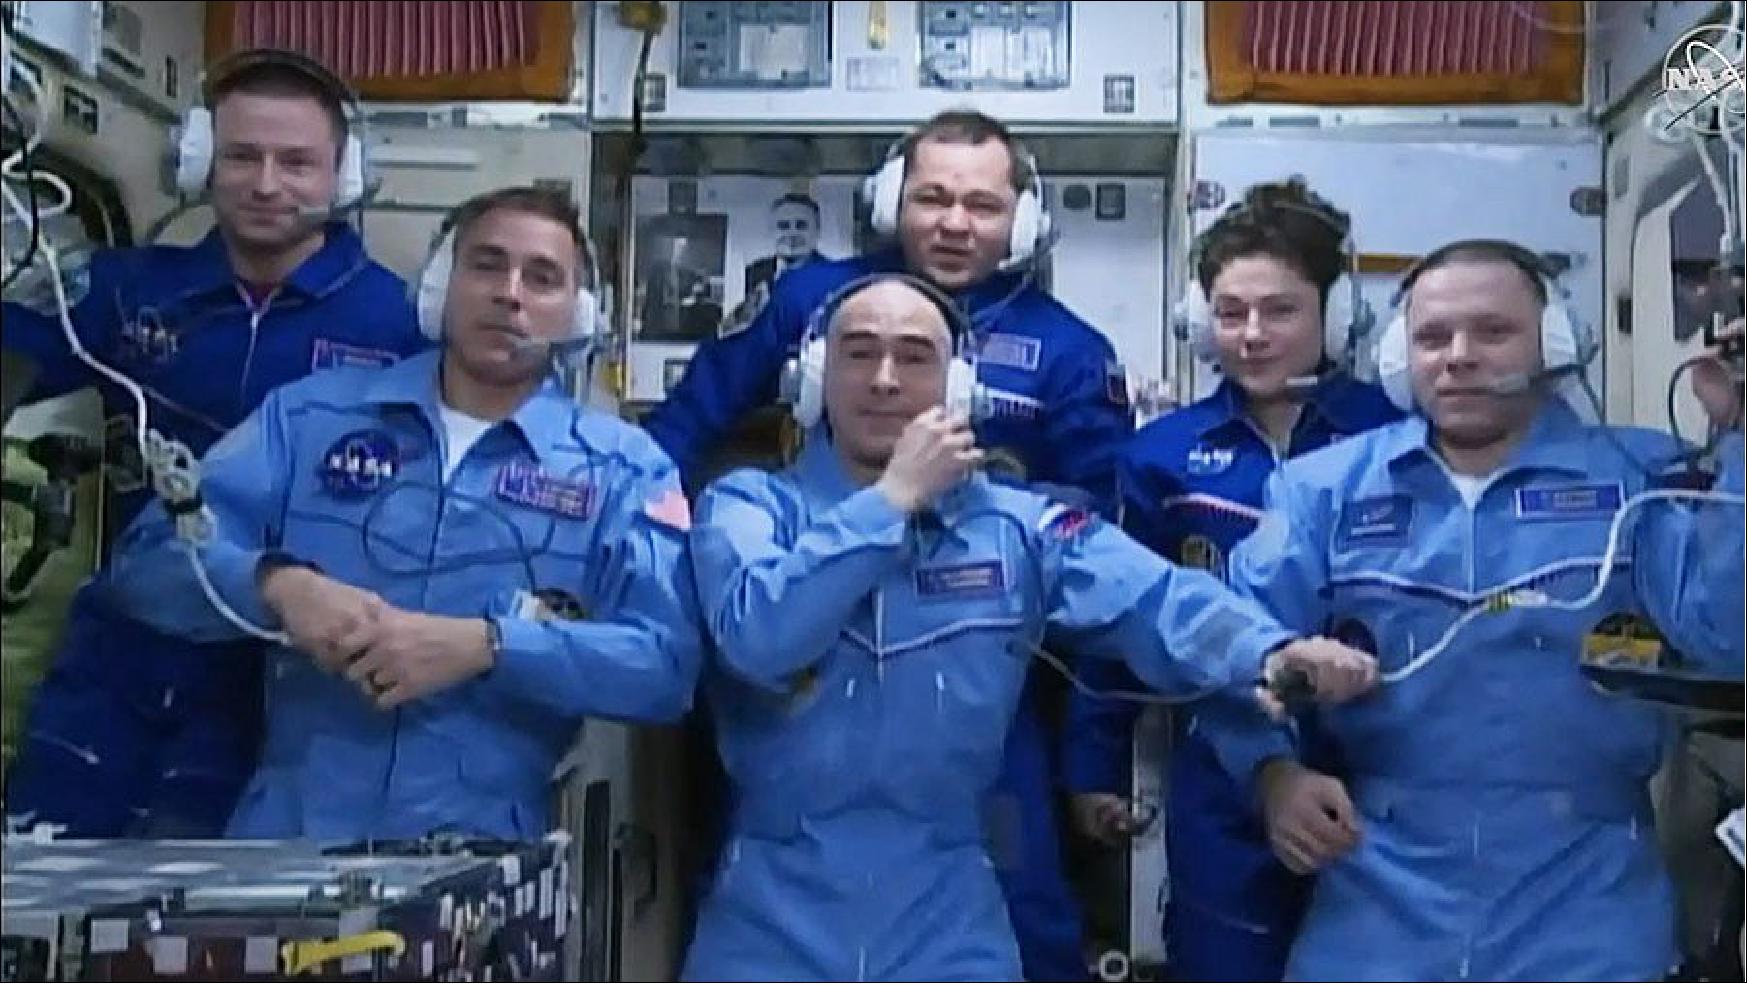 Figure 87: The new Expedition 63 crew joined the Expedition 62 crew today a board the International Space Station. Front row from left: NASA astronaut Chris Cassidy and Roscosmos cosmonauts Anatoly Ivanishin and Ivan Vagner. Back row from left: NASA astronaut Andrew Morgan, Roscosmos cosmonaut Oleg Skripochka and NASA astronaut Jessica Meir (image credit: NASA TV)